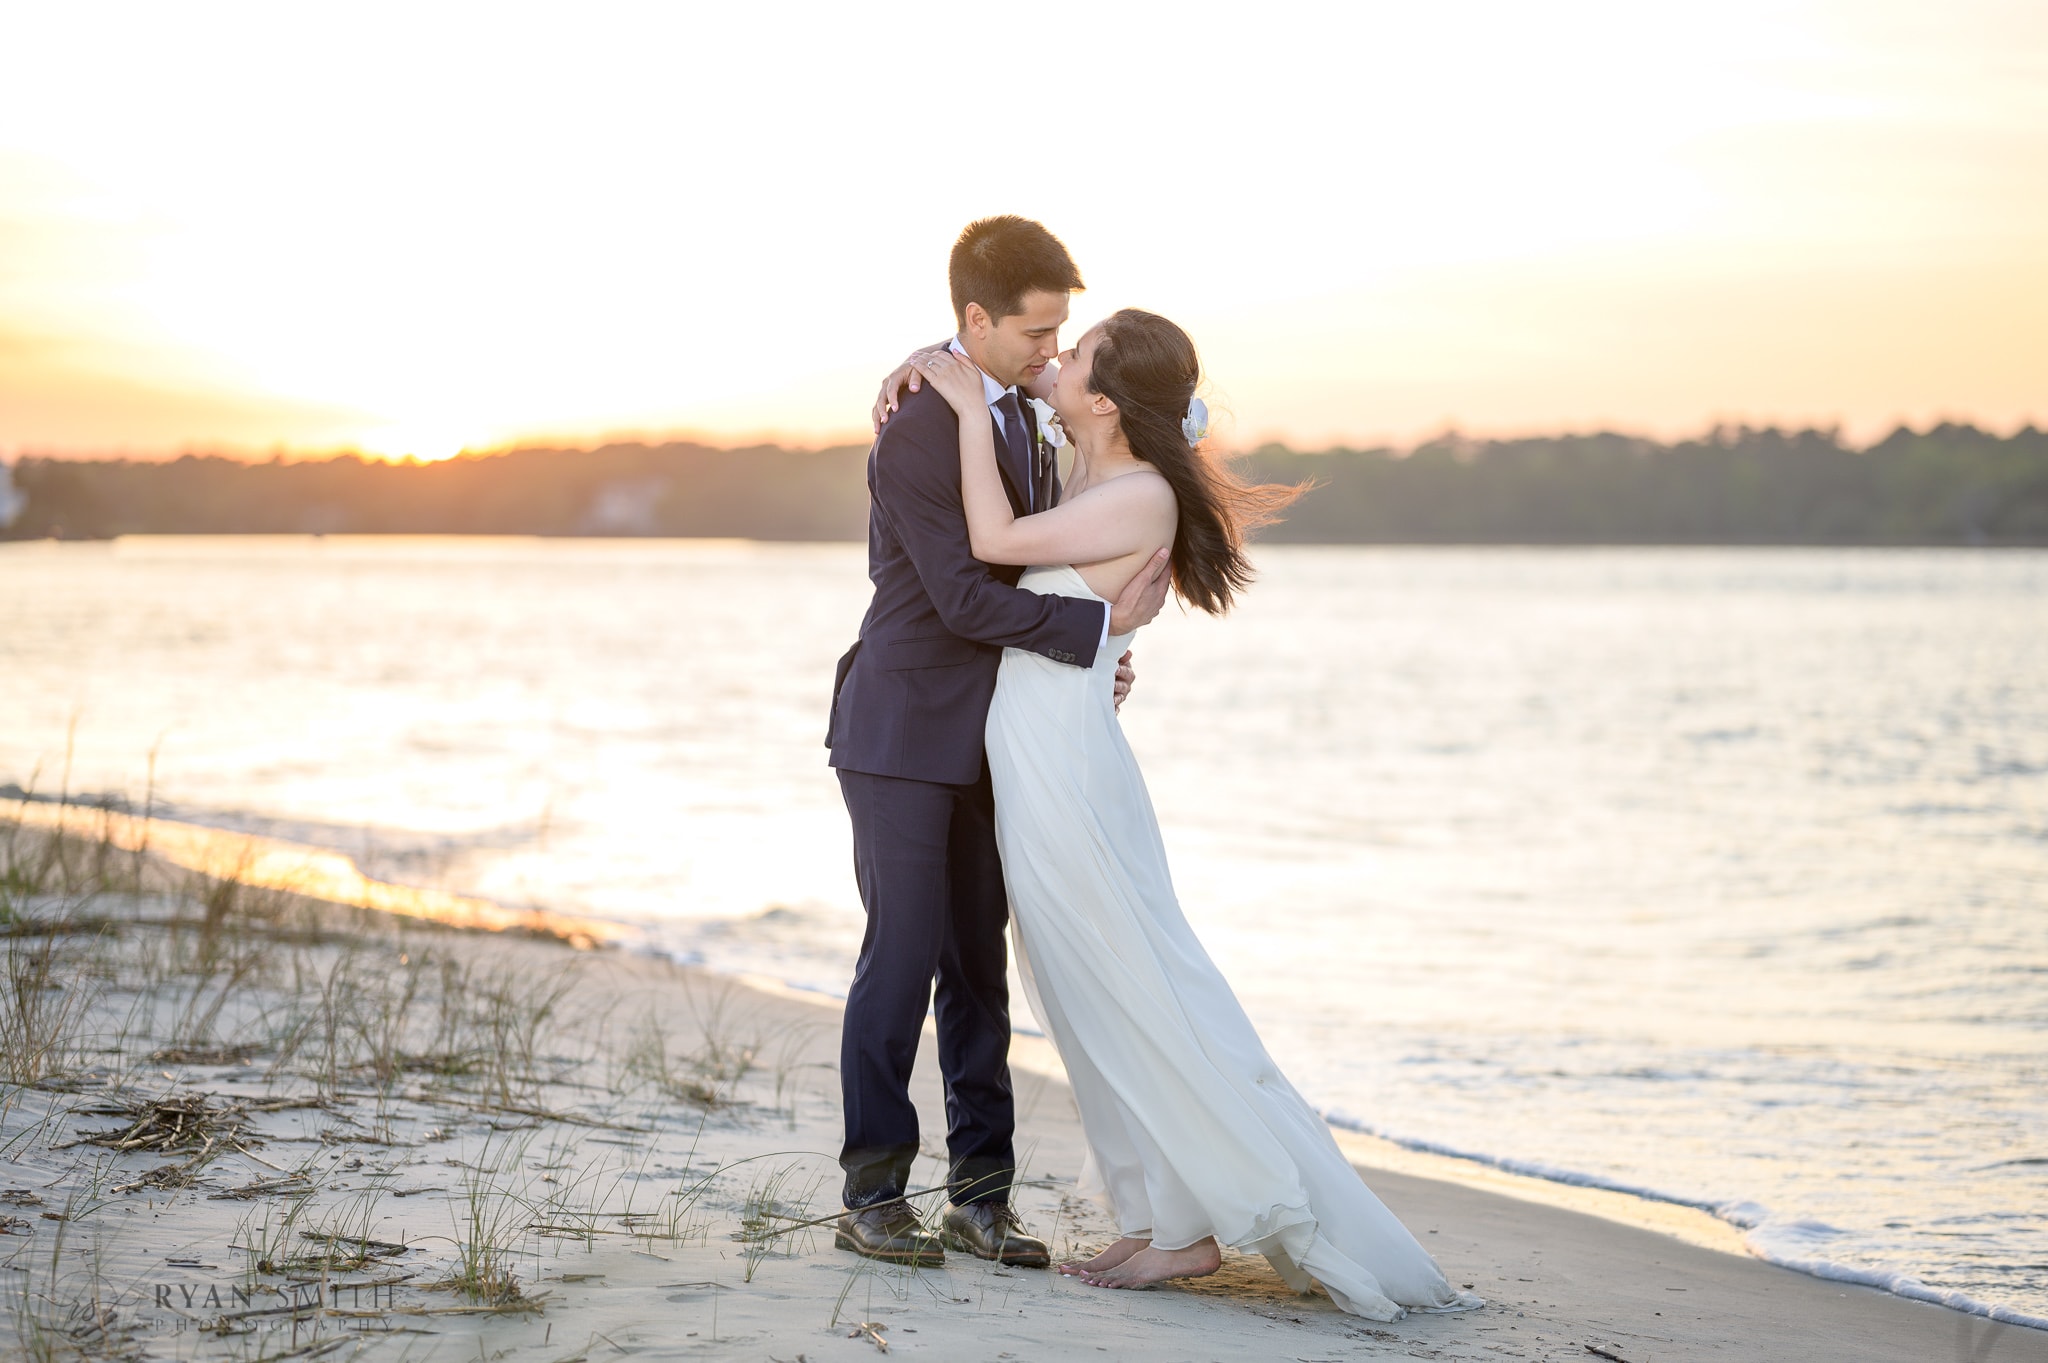 Romance in the sunset - Cherry Grove Point - North Myrtle Beach